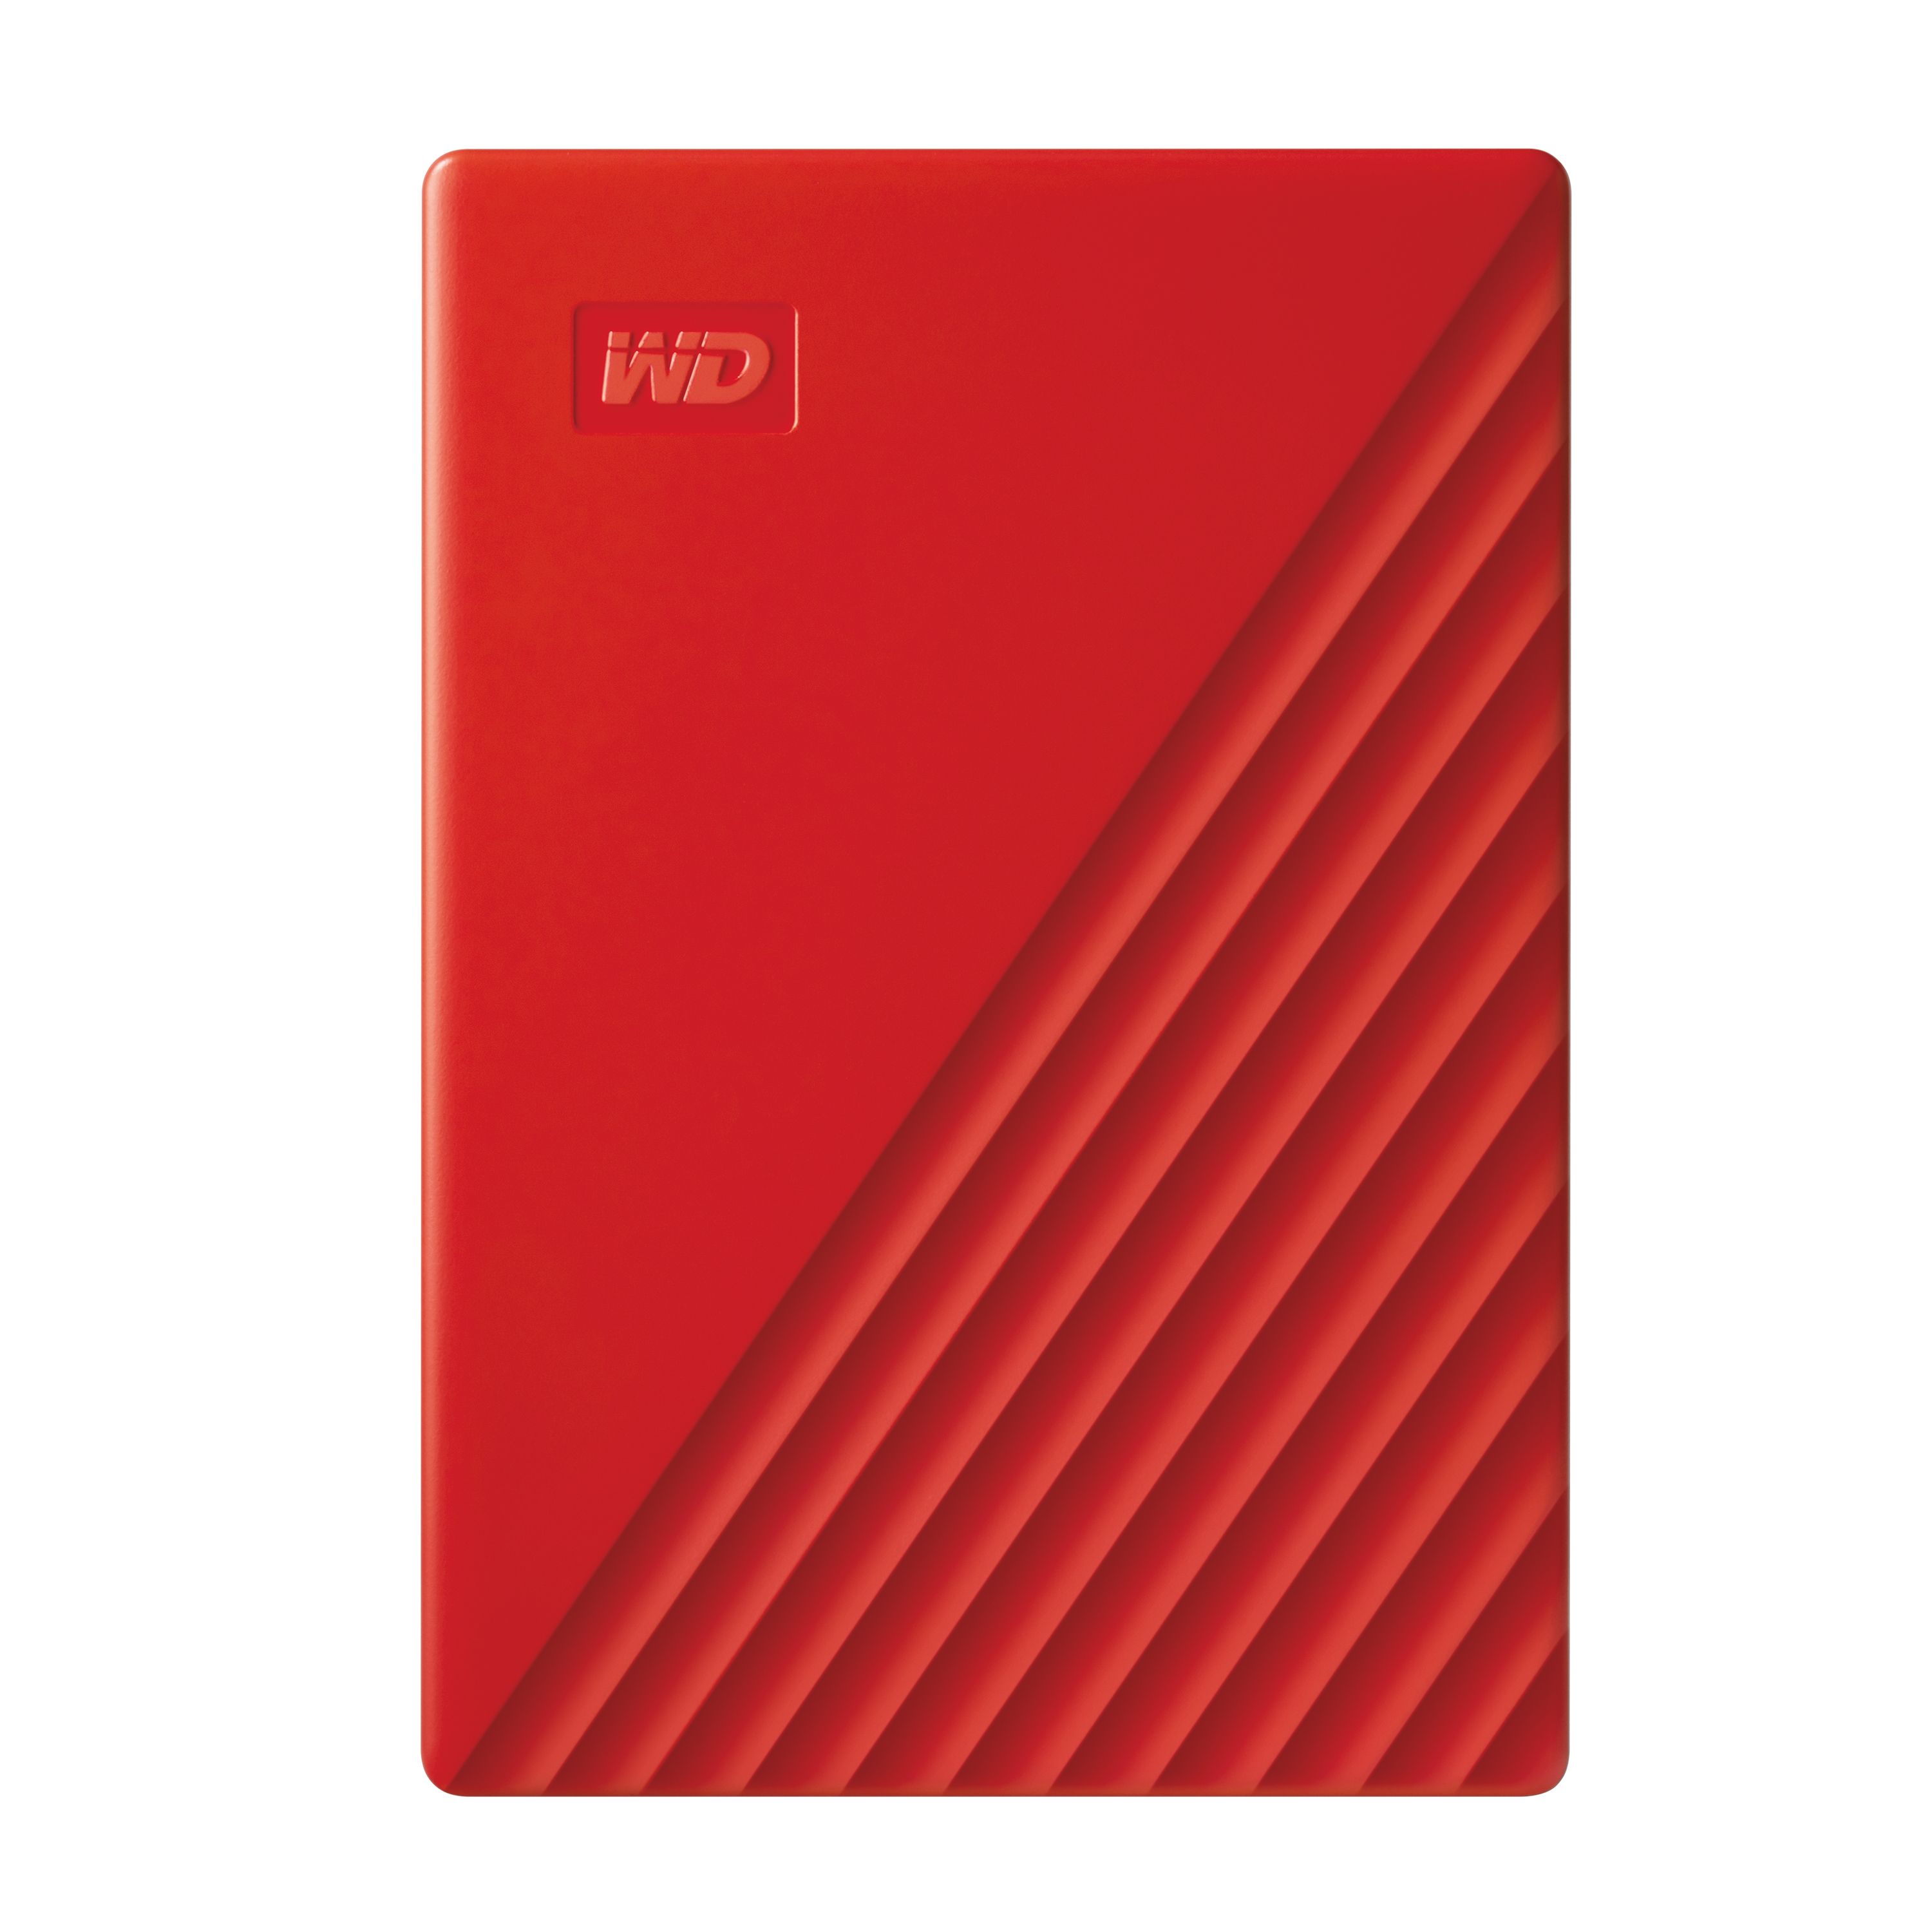 will the wd 2tb passport for mac portable work for windows